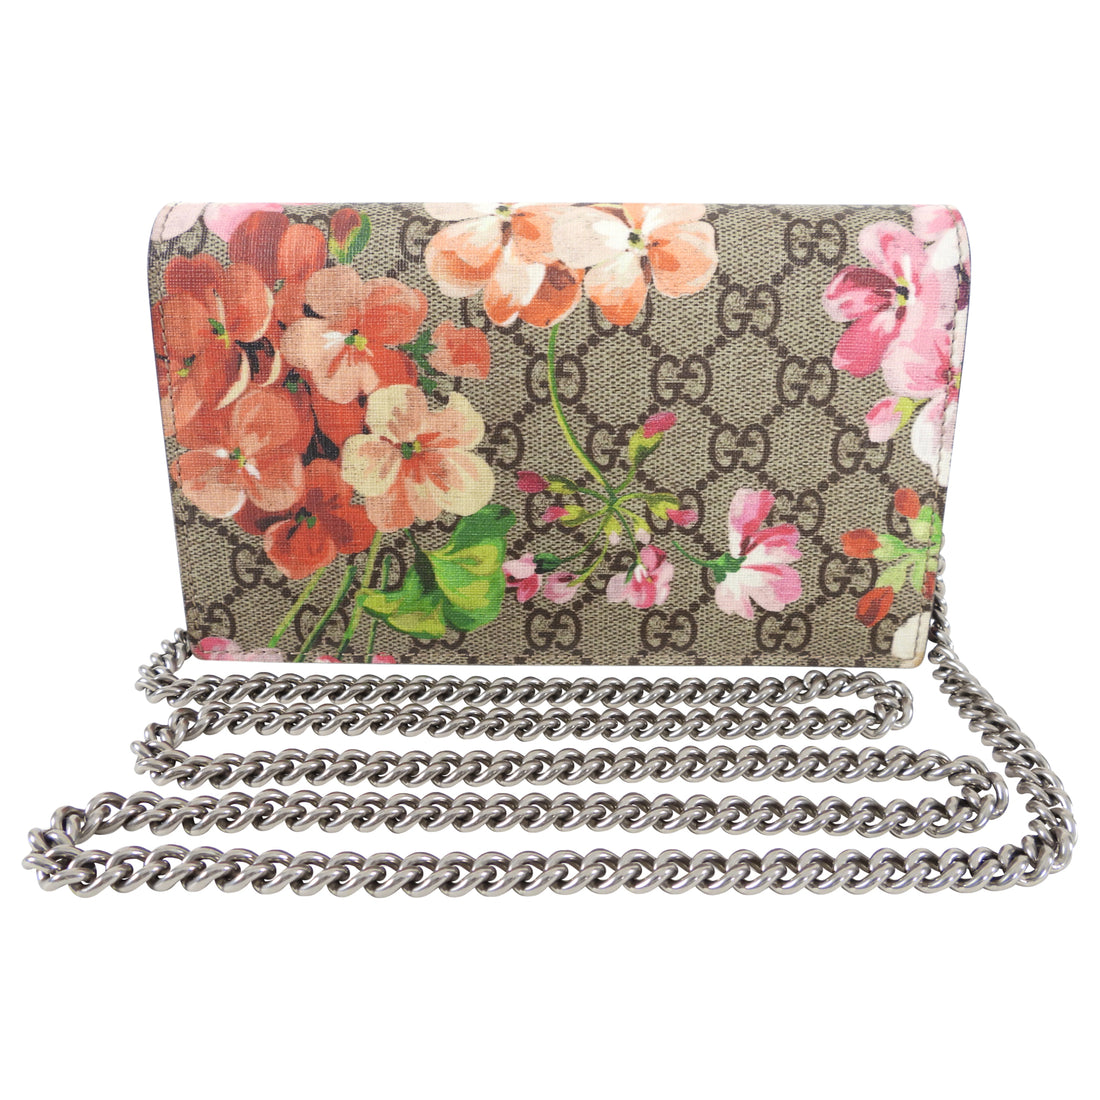 Gucci Blooms Monogram Supreme Pink Floral Wallet on Chain – I MISS YOU ...